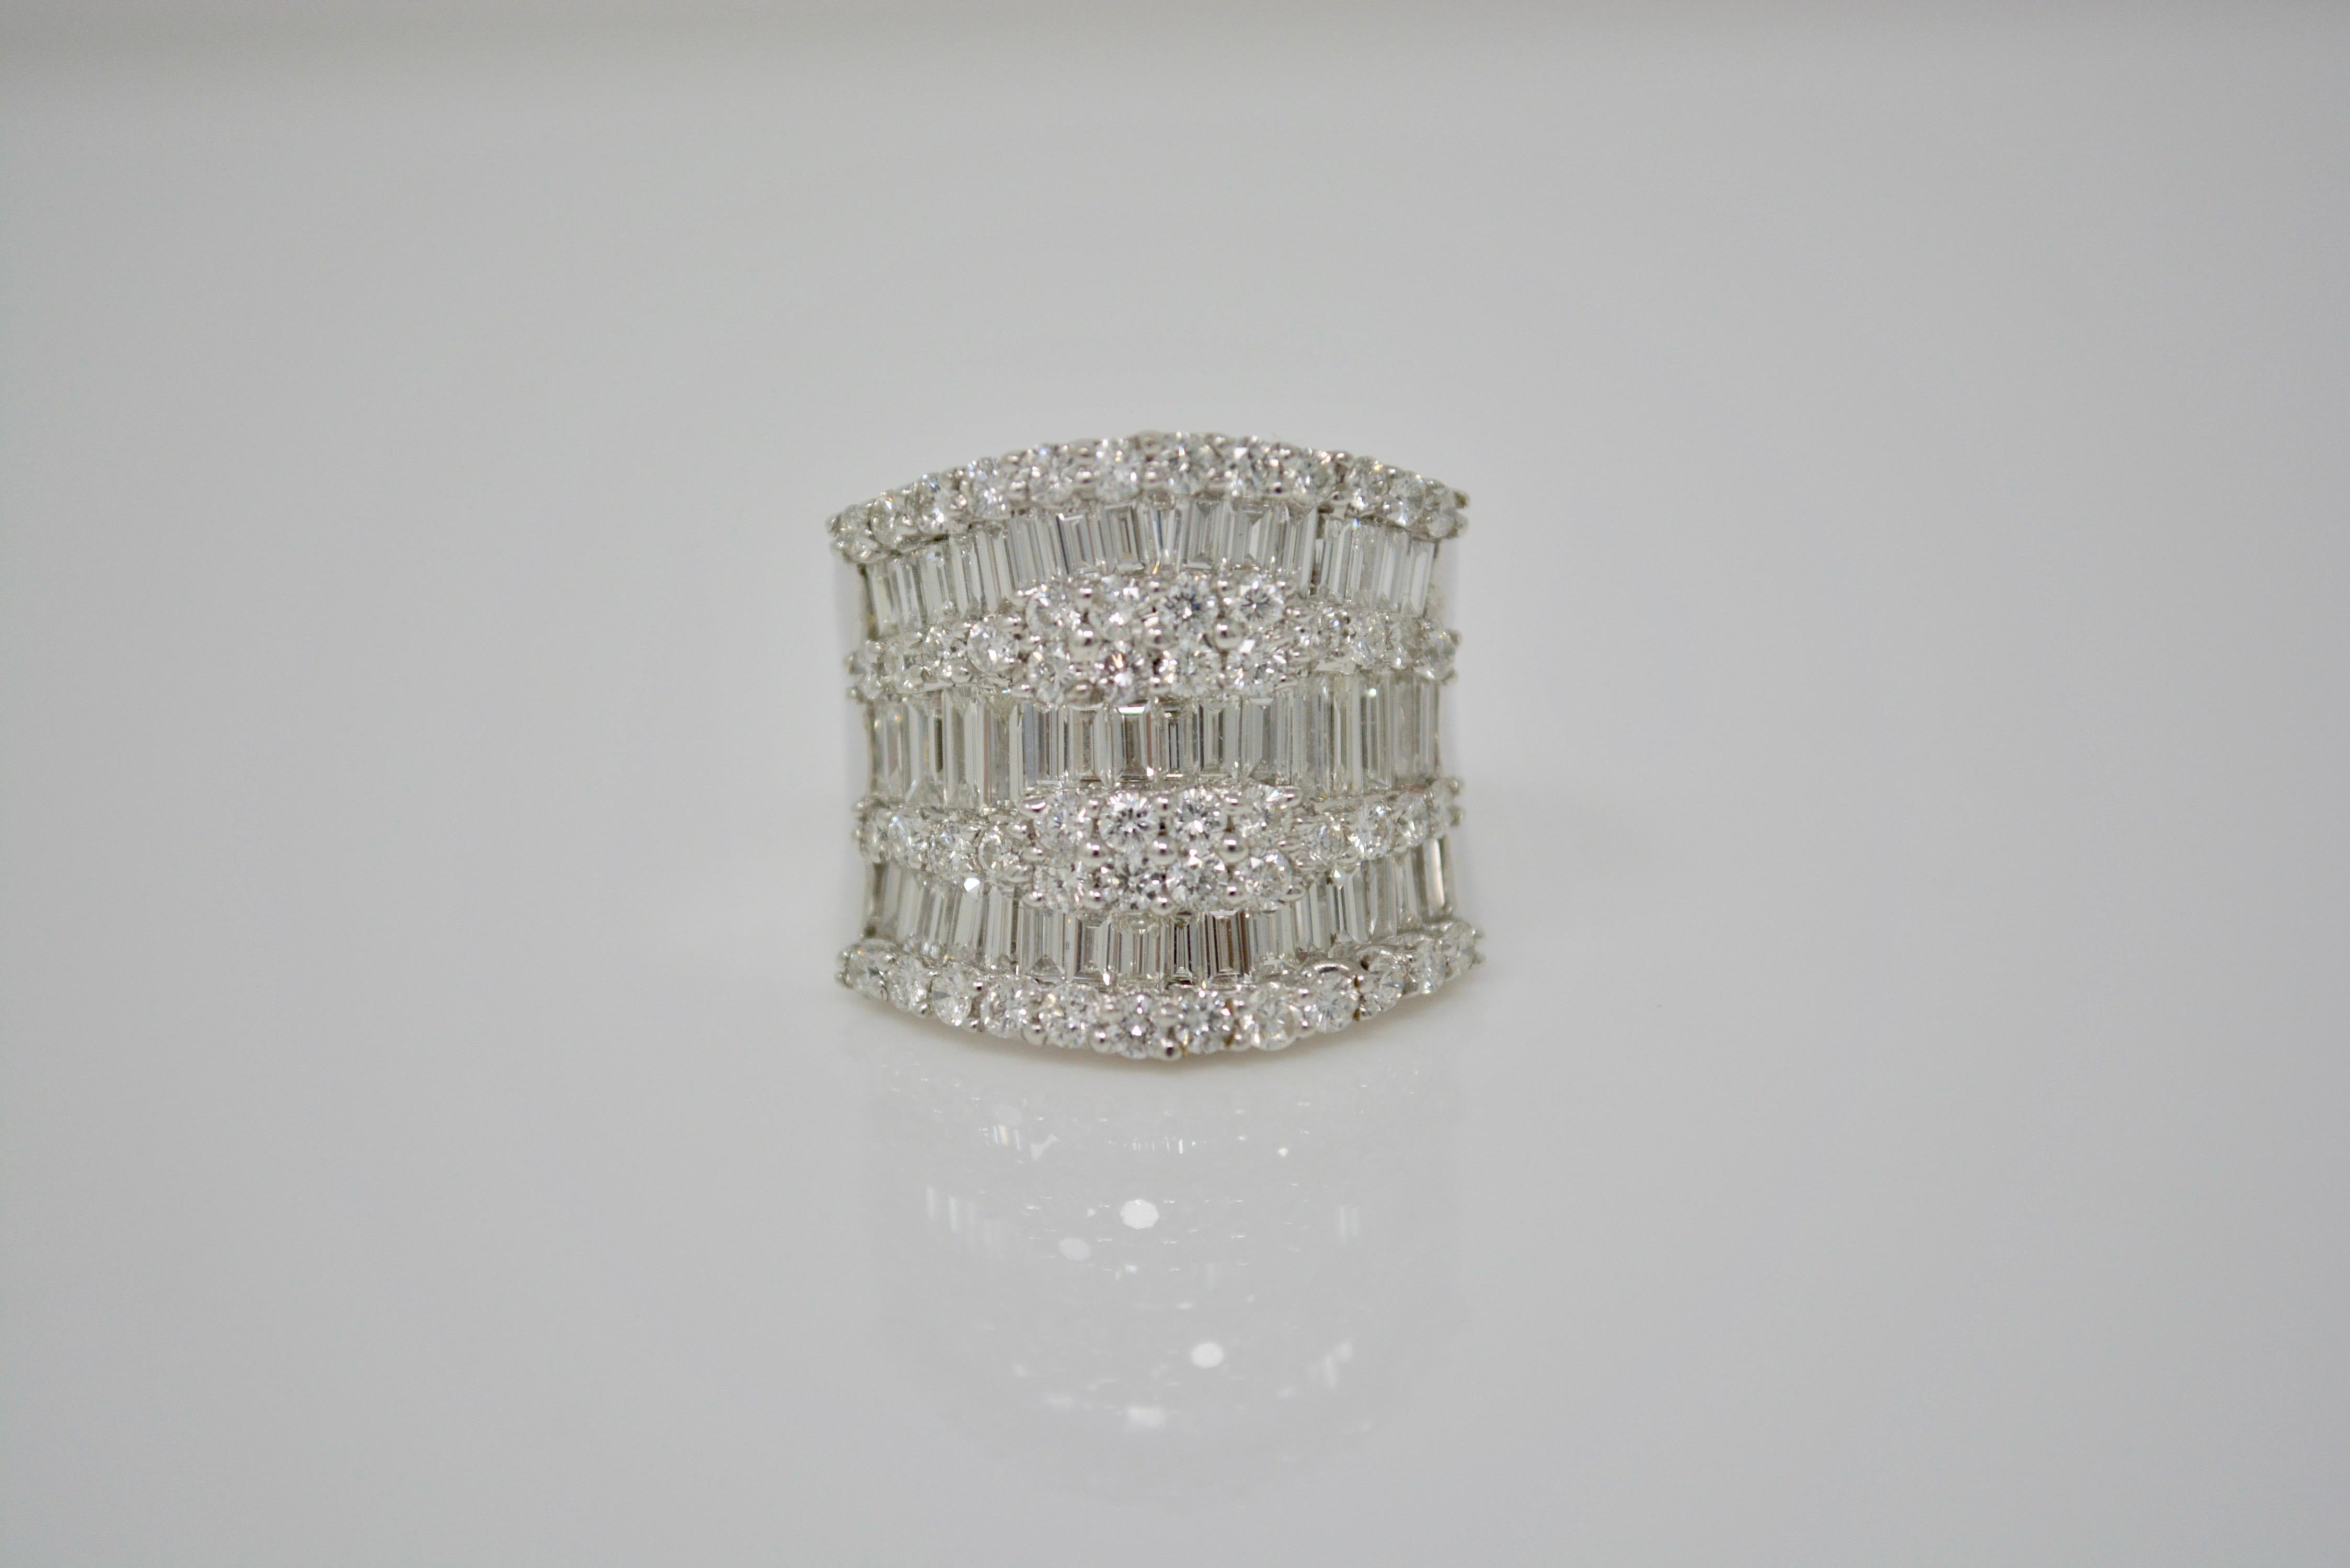 An attractive diamond cocktail ring that displays unbelievable spark. This spectacular cocktail ring features a total of 3.31 carat of white round brilliant diamond and baguettes with G-H color and VS clarity. This is beautifully handcrafted in 18k